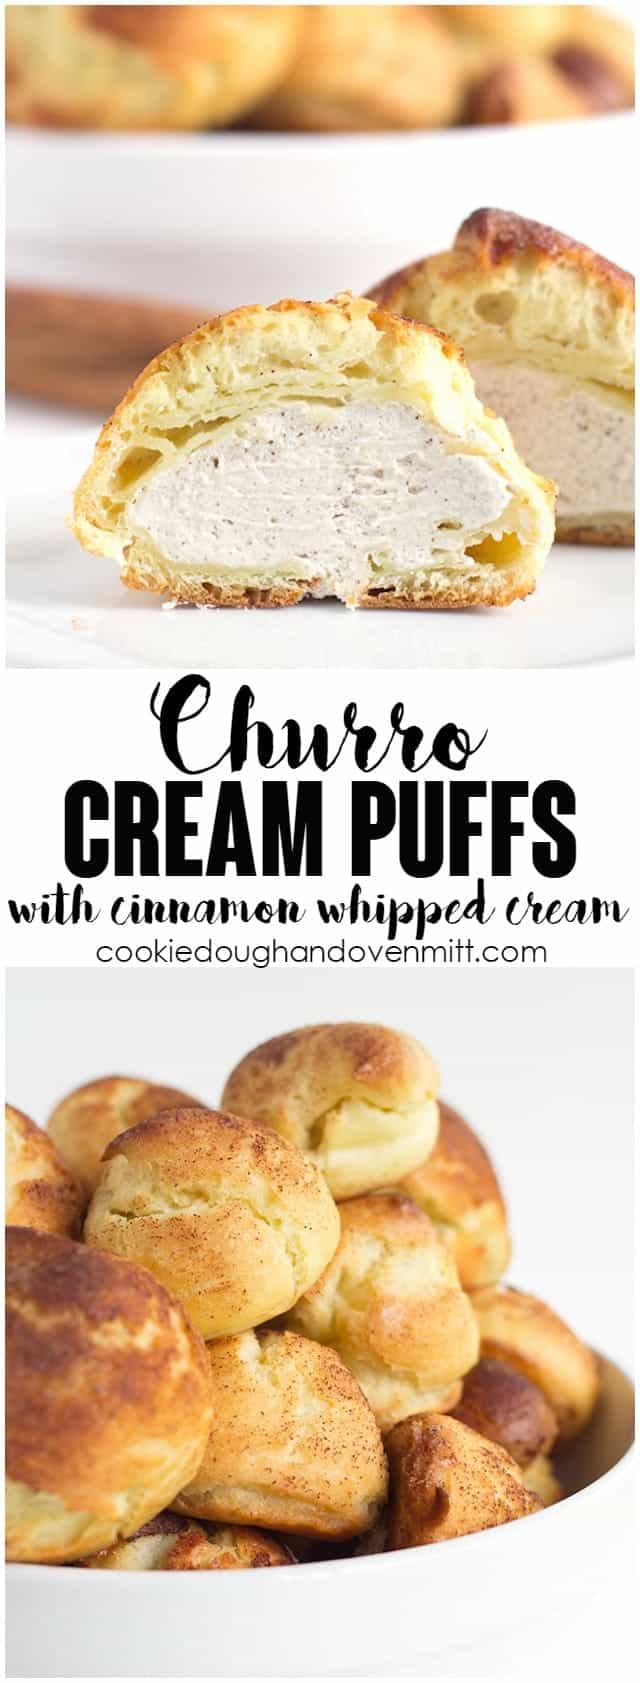 Churro Cream Puffs - easy cream puffs topped with cinnamon and sugar and filled with a cinnamon whipped cream.